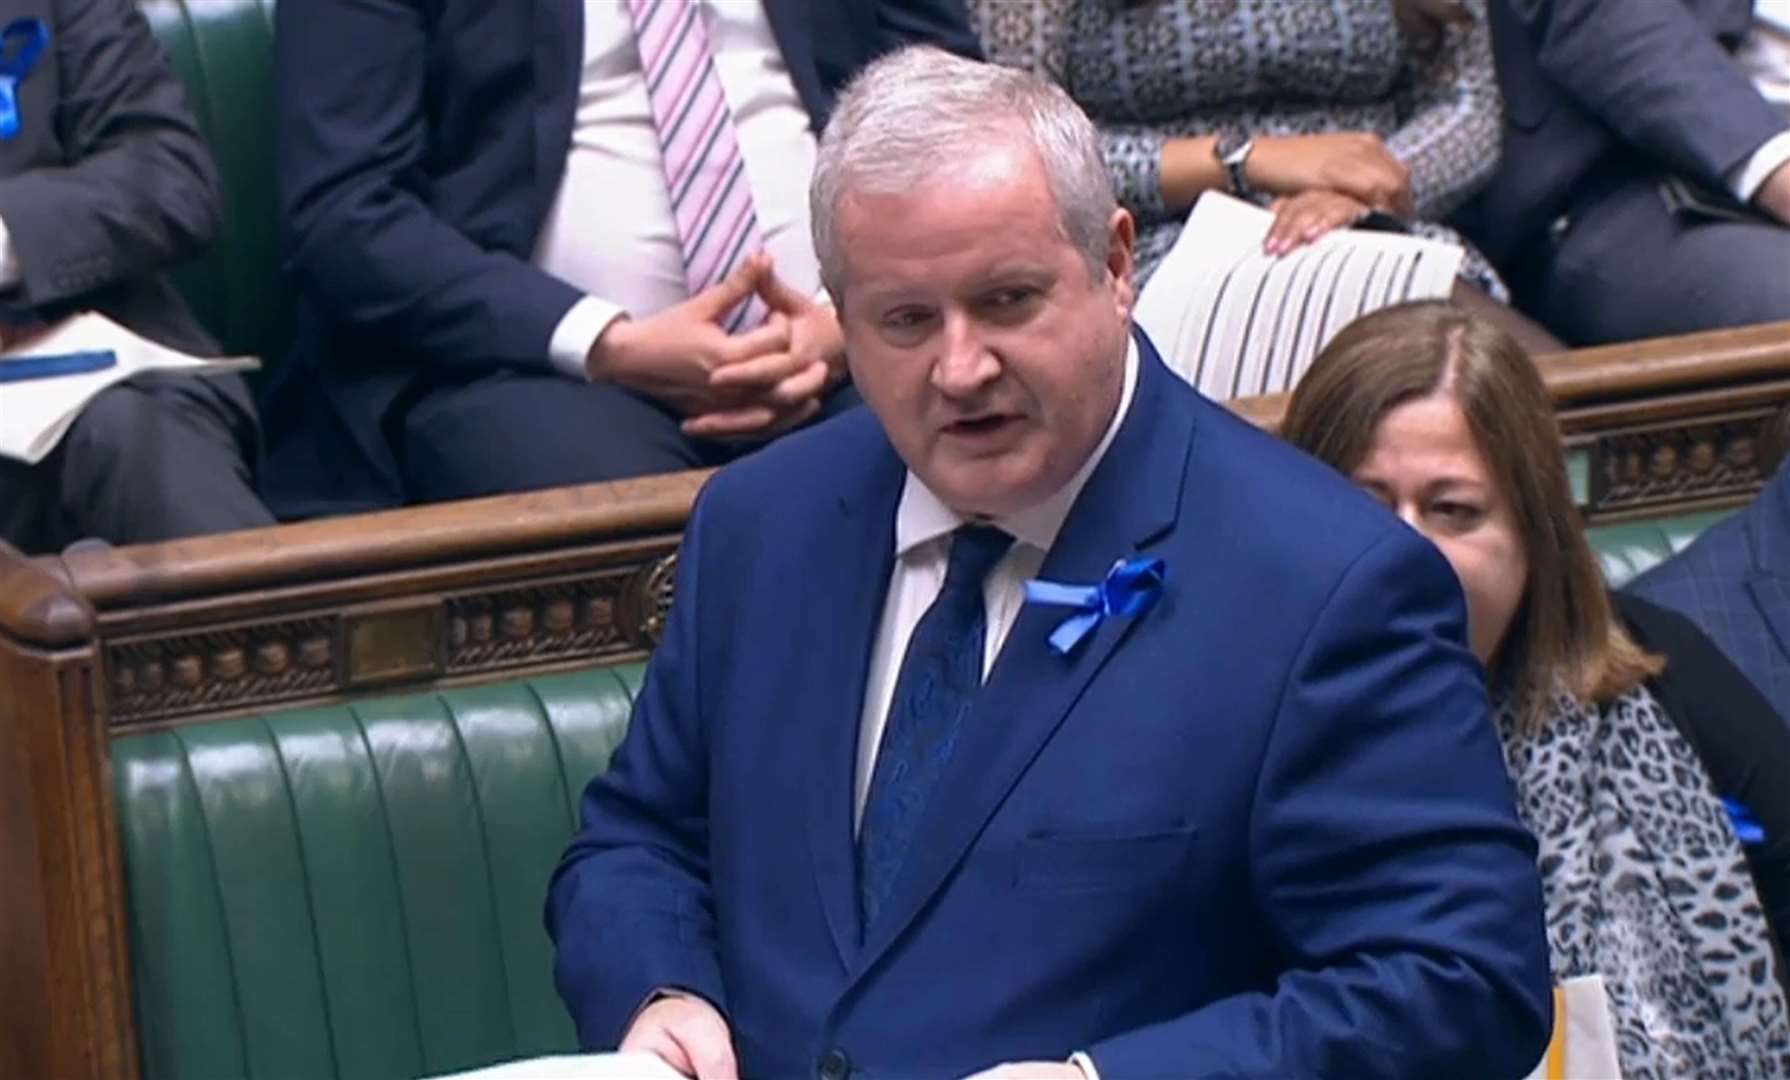 SNP Westminster leader Ian Blackford was heard in a leaked recording to encourage party MPs to rally round Mr Grady (House of Commons/PA)